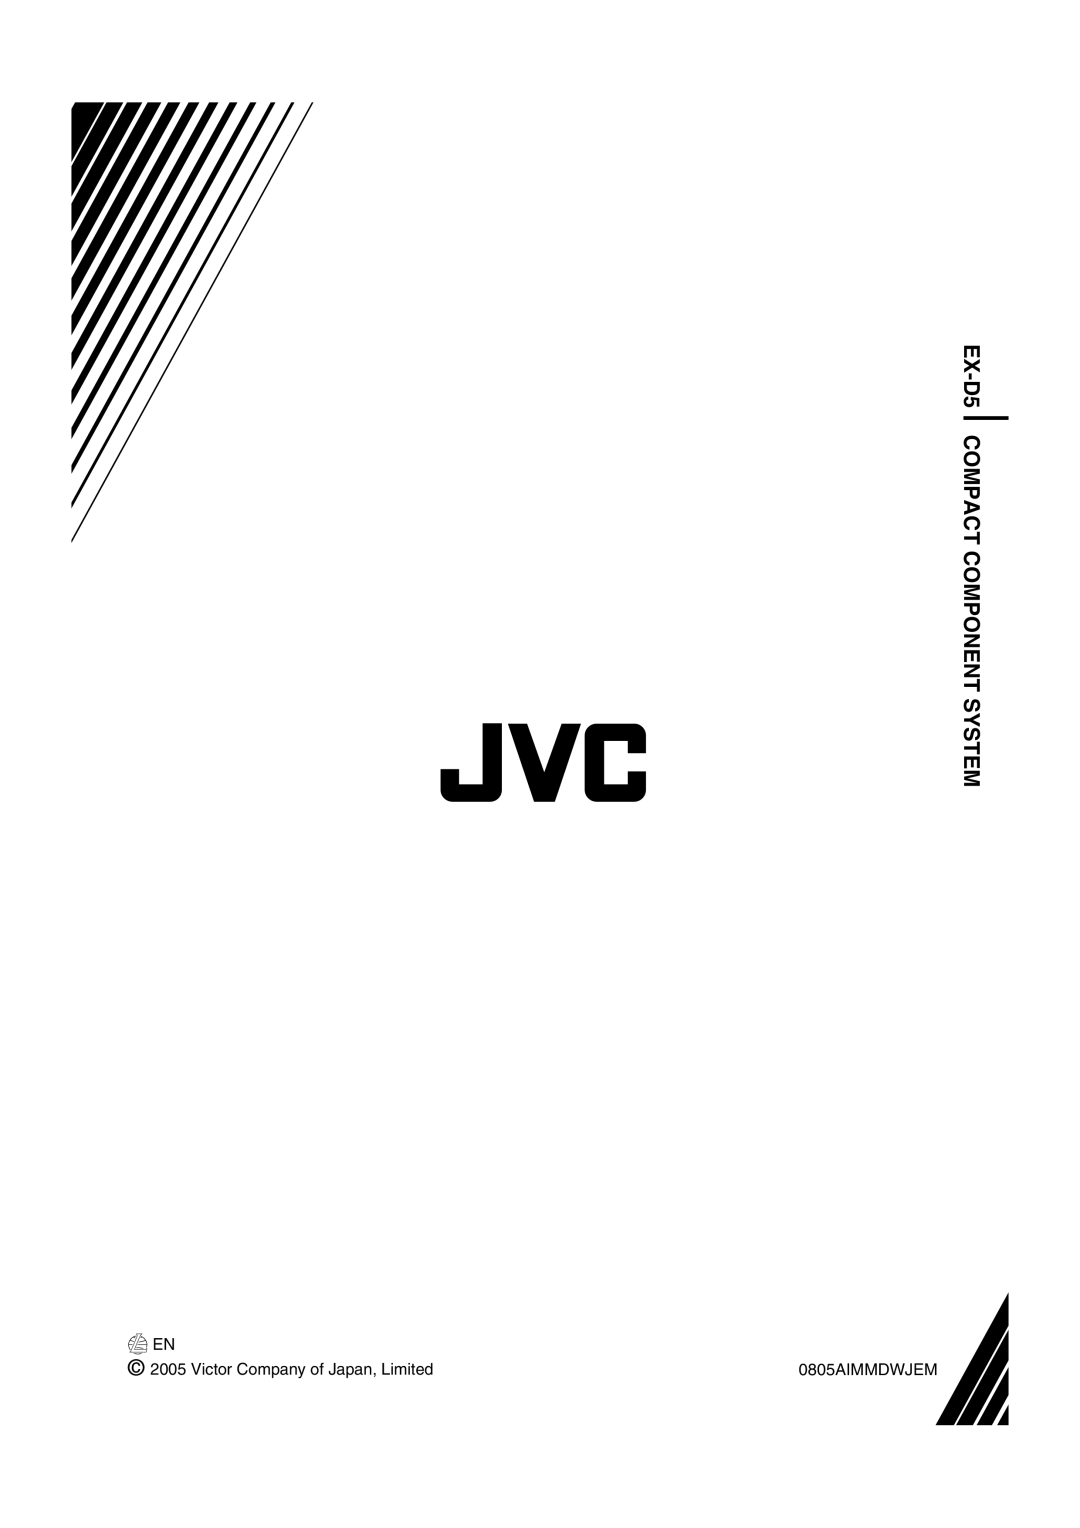 JVC GVT0144-005A manual EX-D5COMPACT COMPONENT SYSTEM, c 2005 Victor Company of Japan, Limited, 0805AIMMDWJEM 